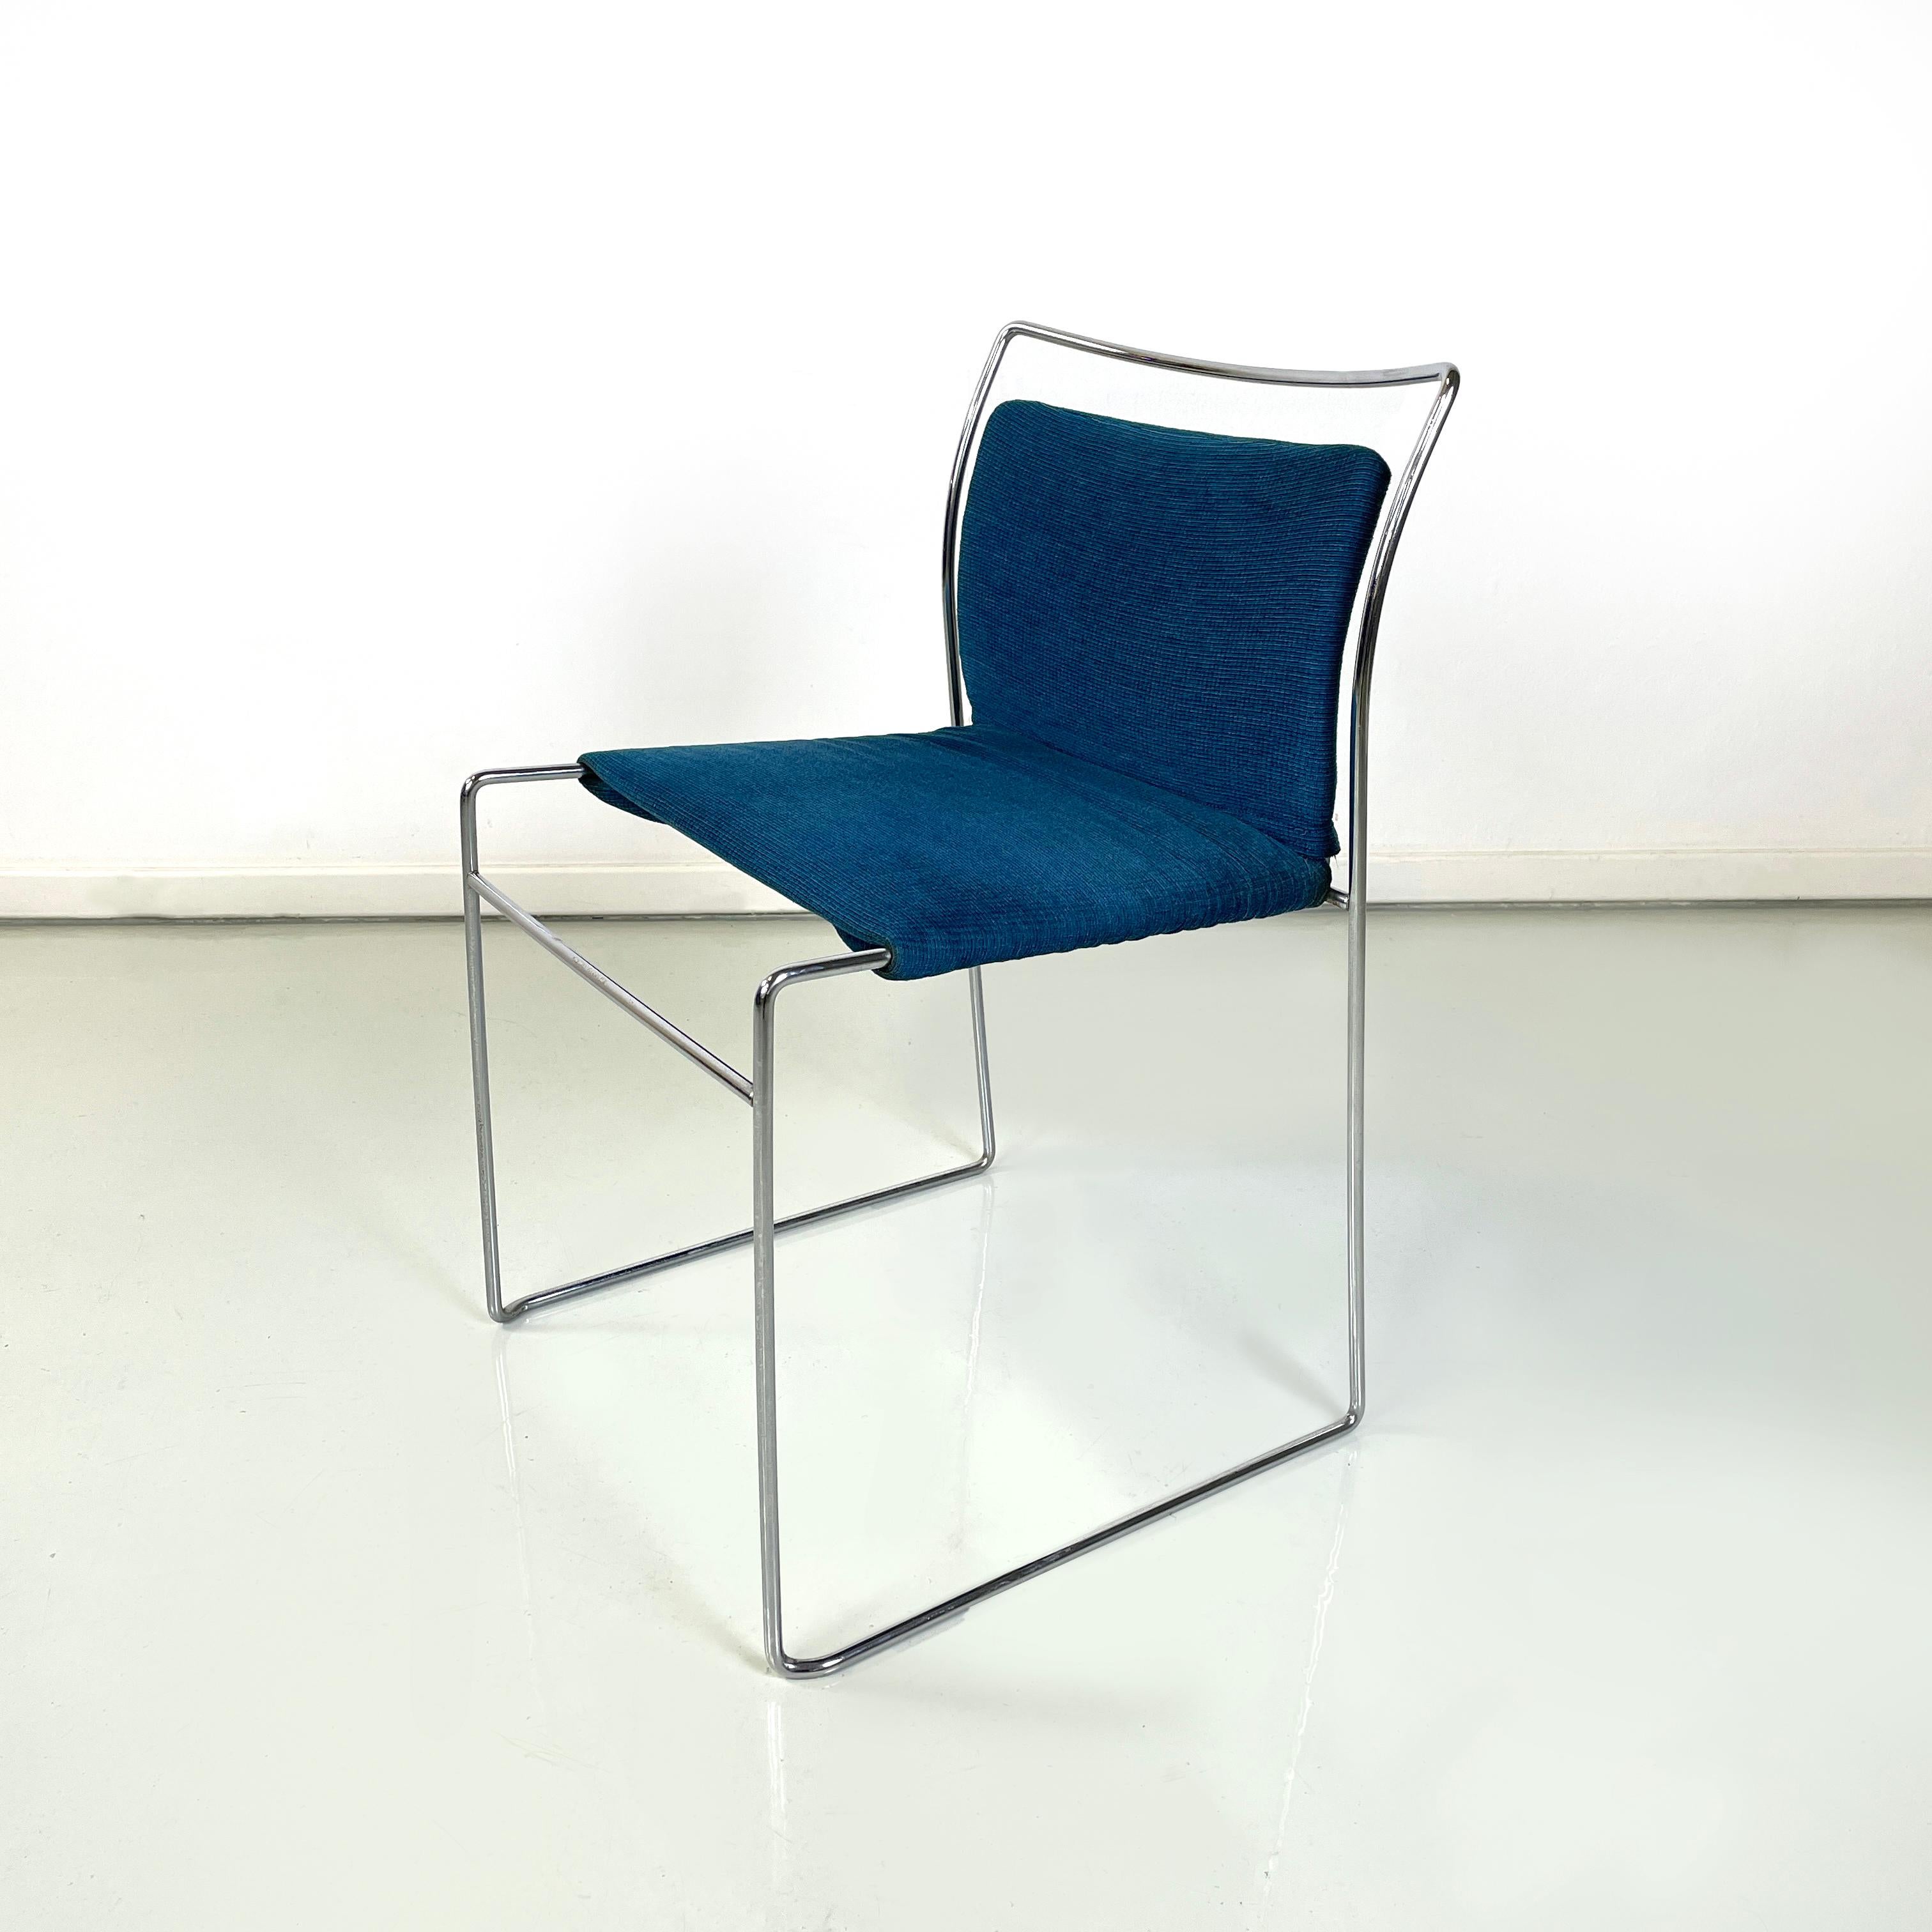 Italian mid-century modern Stackable Chairs Tulu by Kazuhide Takahama for Simon Gavina, 1973
Set of 6 Iconic and vintage chairs mod. Tulu with rectangular seat and backrest, padded and covered in blue textured velvet fabric. Steel rod structure. The